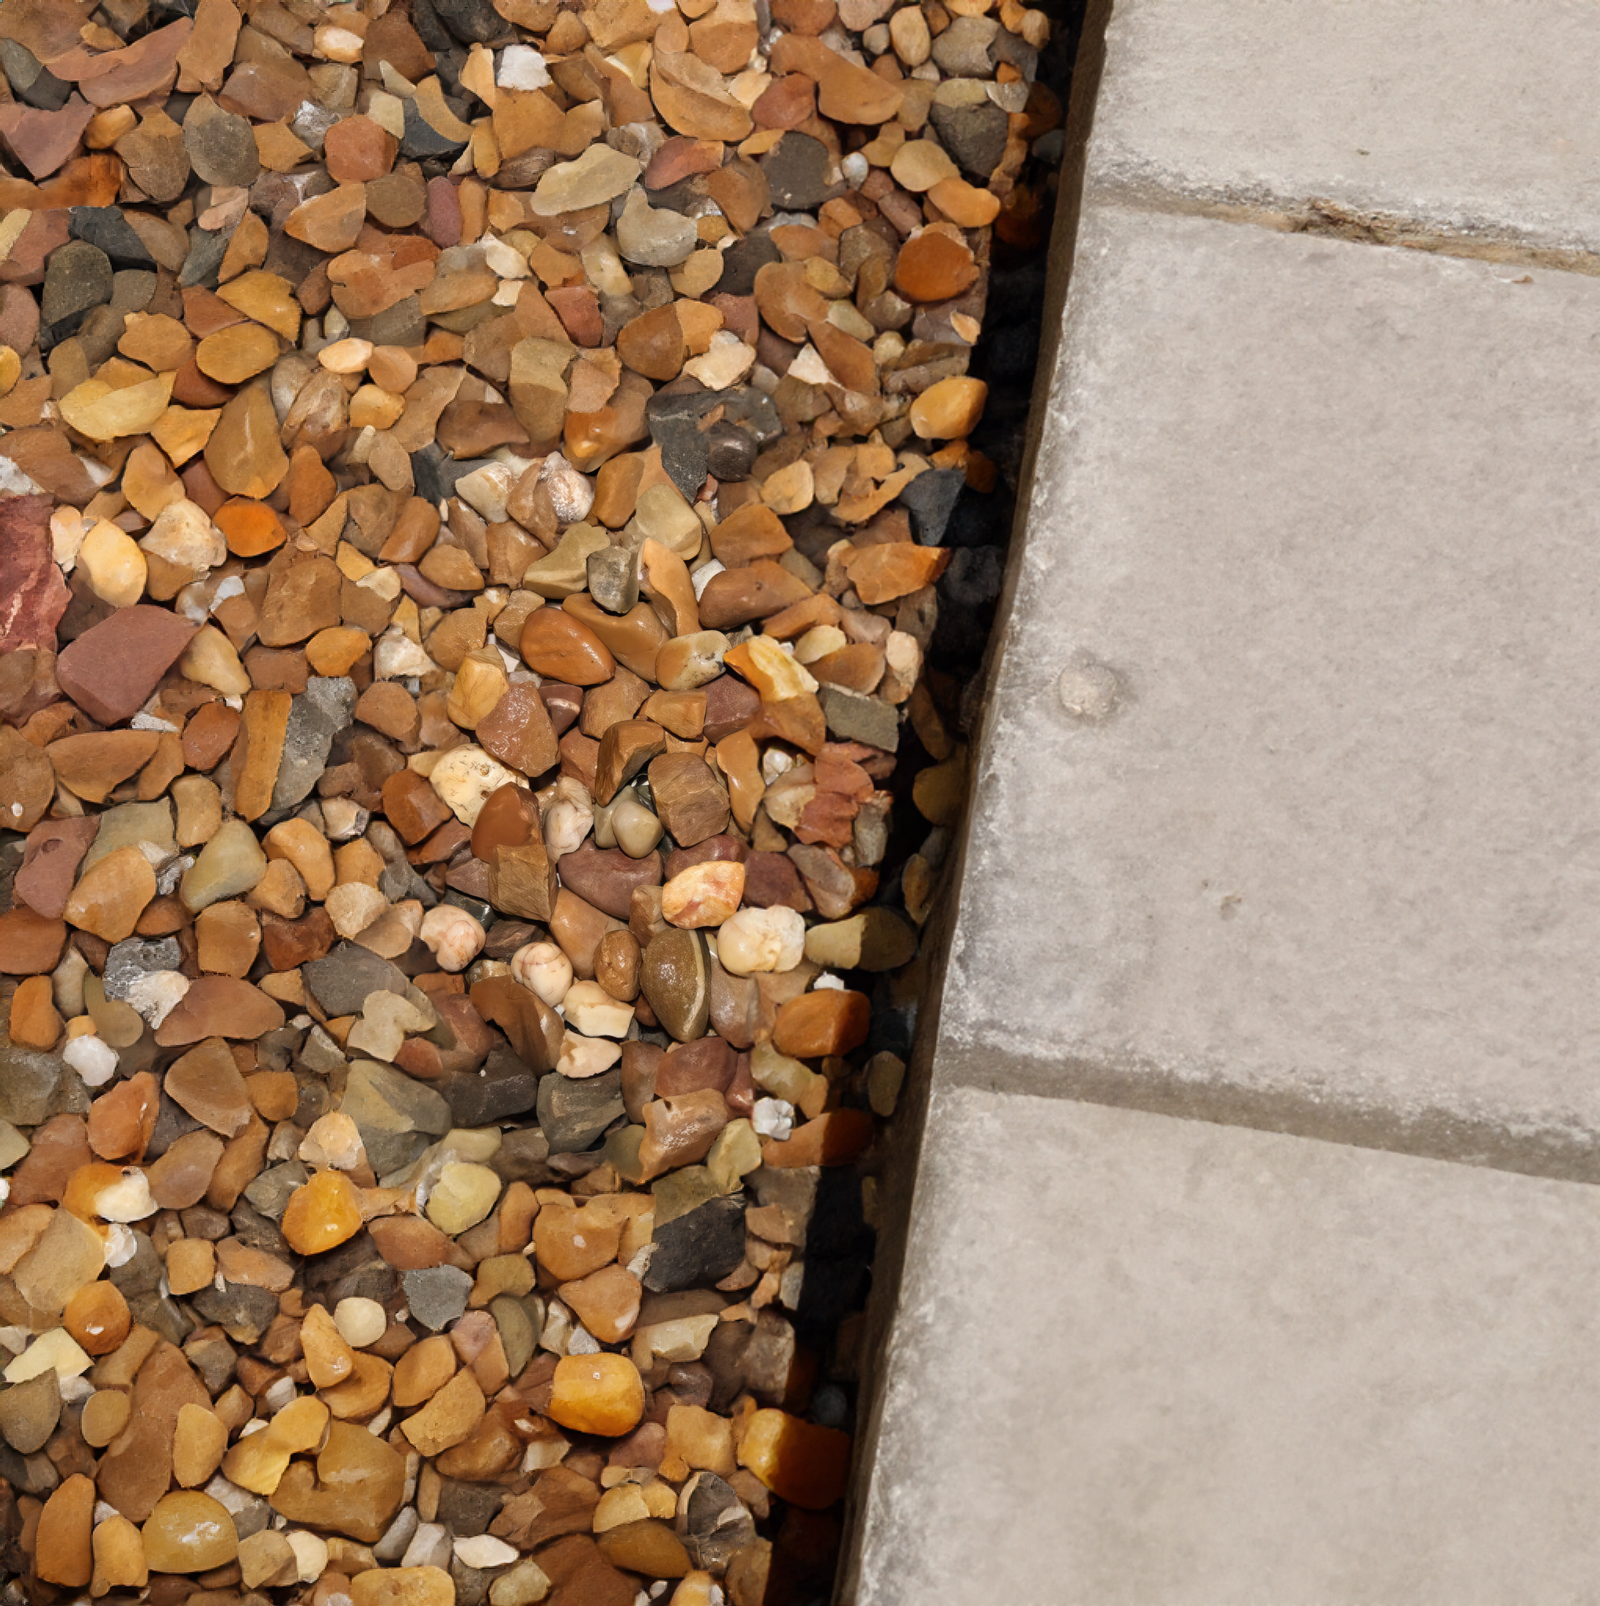 A close-up of small, multicolored pebbles, possibly 20mm Trent Valley Gravel, next to a concrete path. The Brisks 20mm Trent Valley Gravel in brown, tan, and orange hues contrasts with the smooth gray tiles, adding charm to the outdoor landscape.